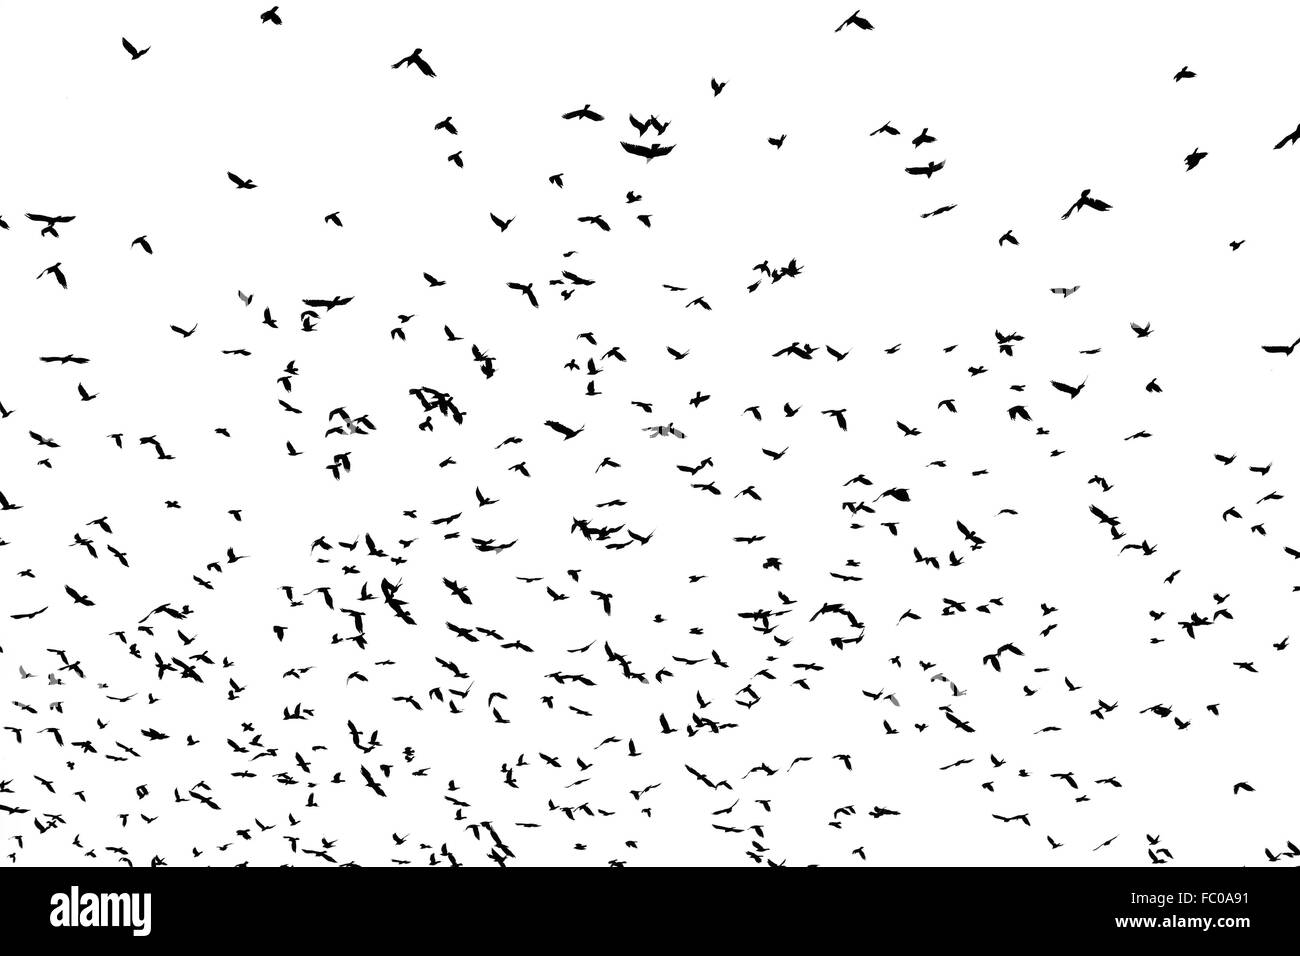 Crows flying Black and White Stock Photos & Images - Alamy